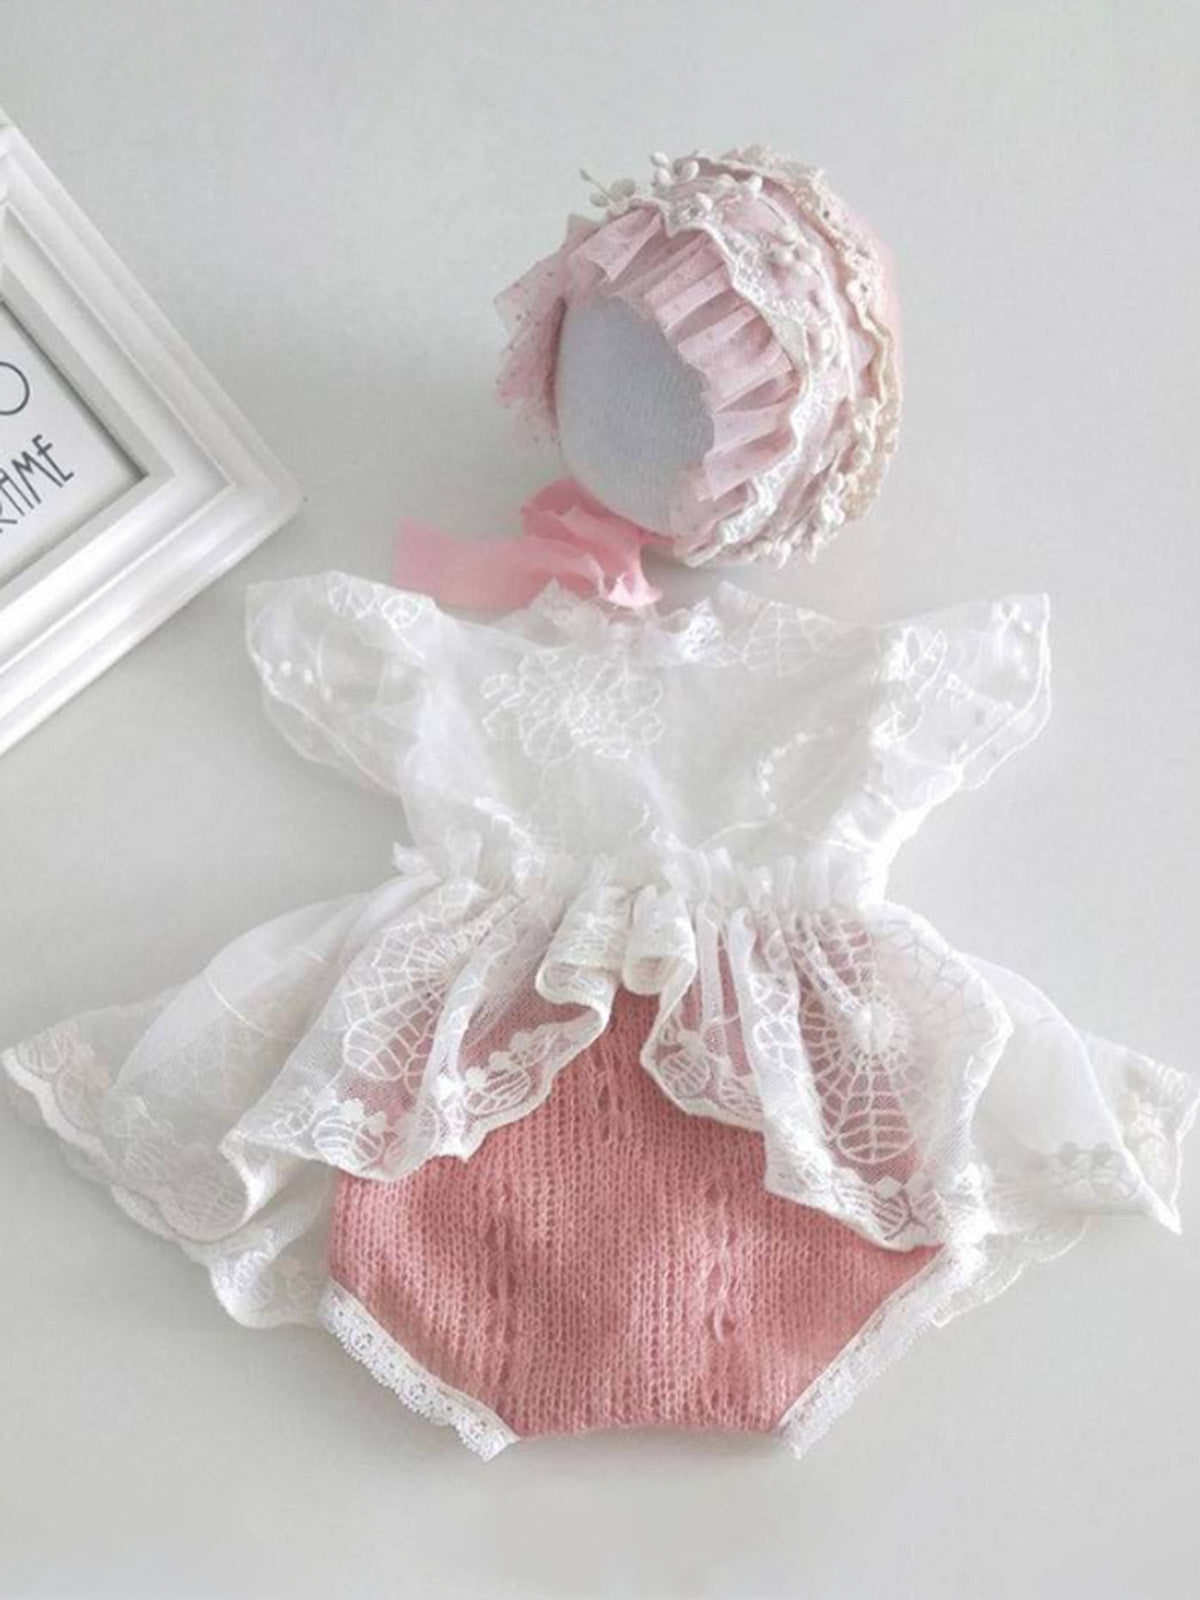 Baby set features a skirted onesie with a lace bodice and a matching cap pink